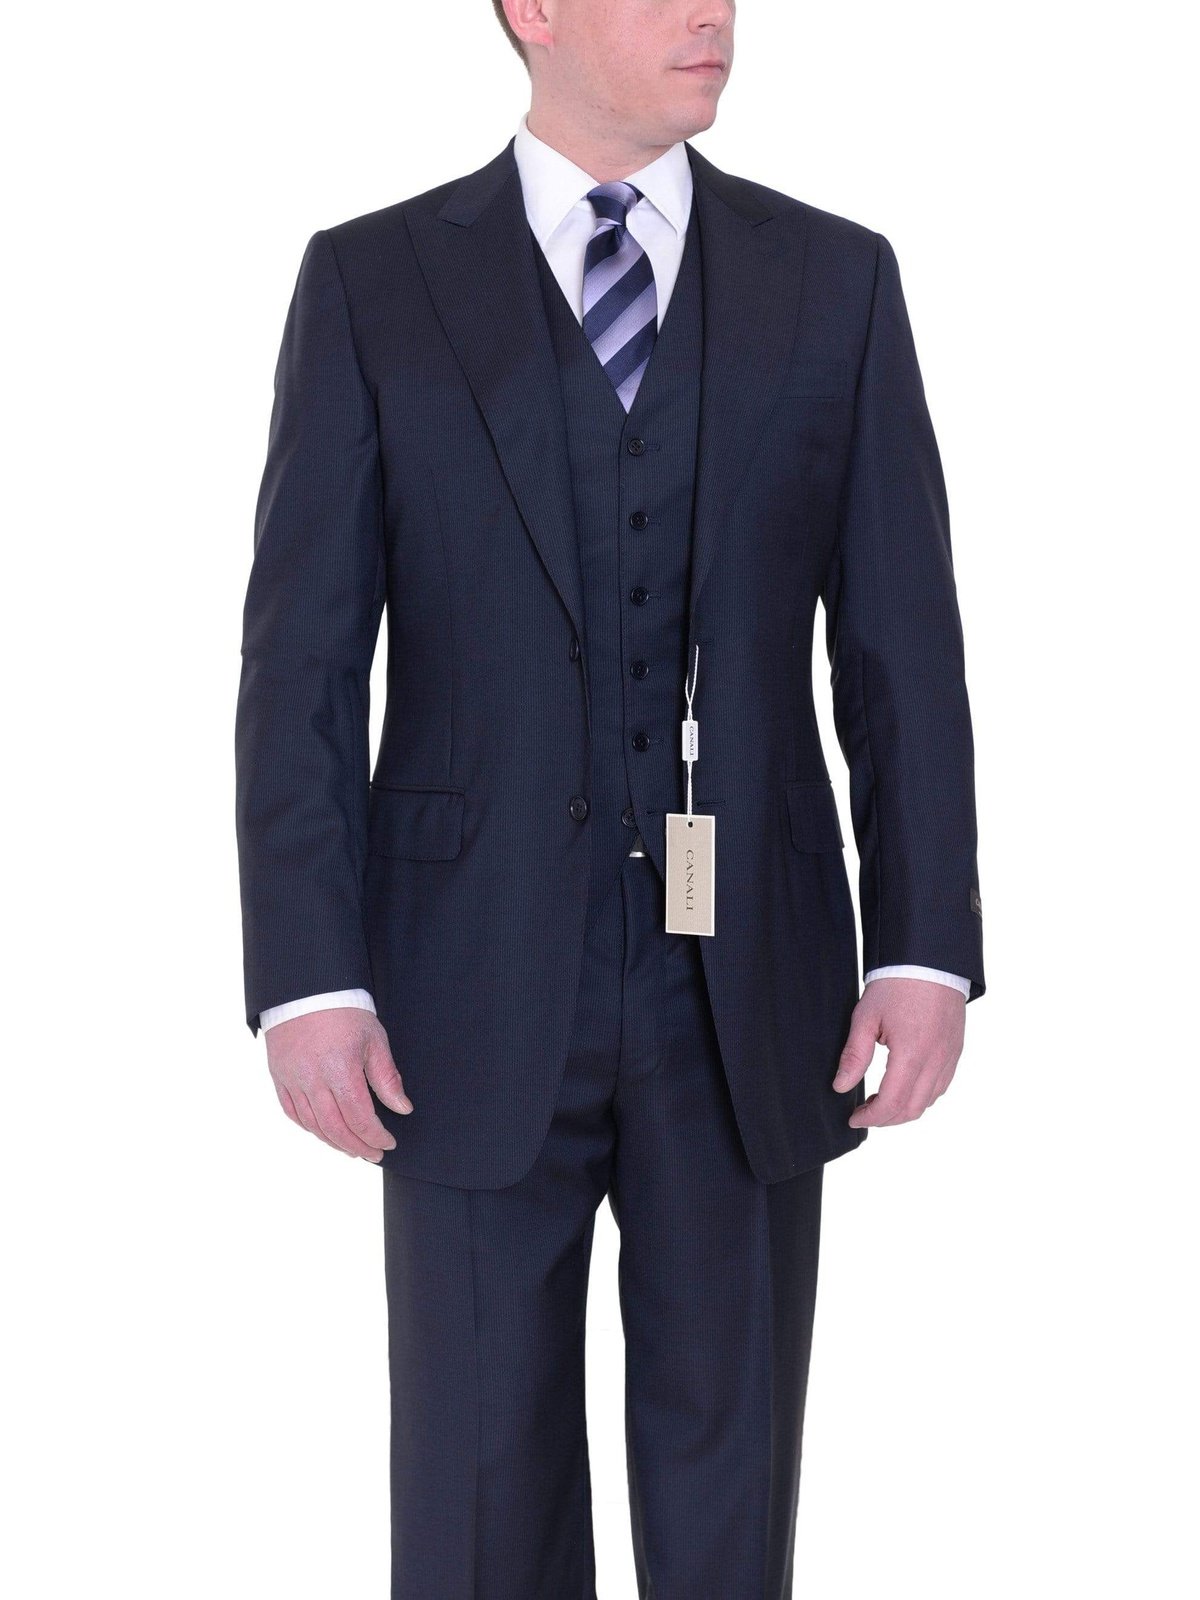 Canali THREE PIECE SUITS Canali 38xl 48 Drop 7 Navy Tonal Striped Three Piece Wool Suit With Peak Lapels